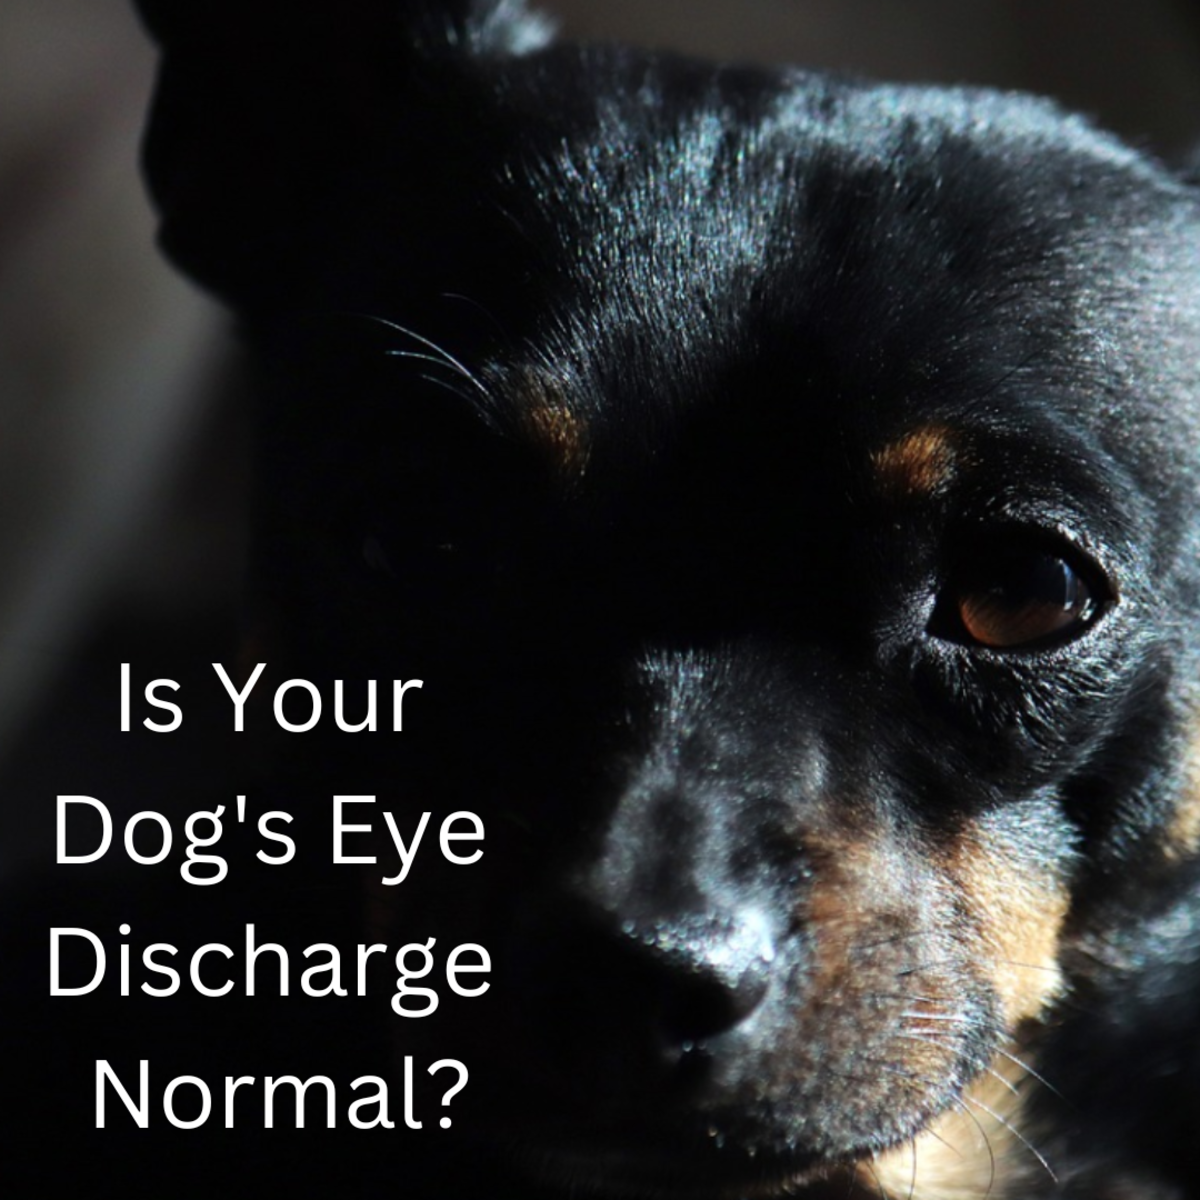 When should I be concerned about my dogs eye discharge?